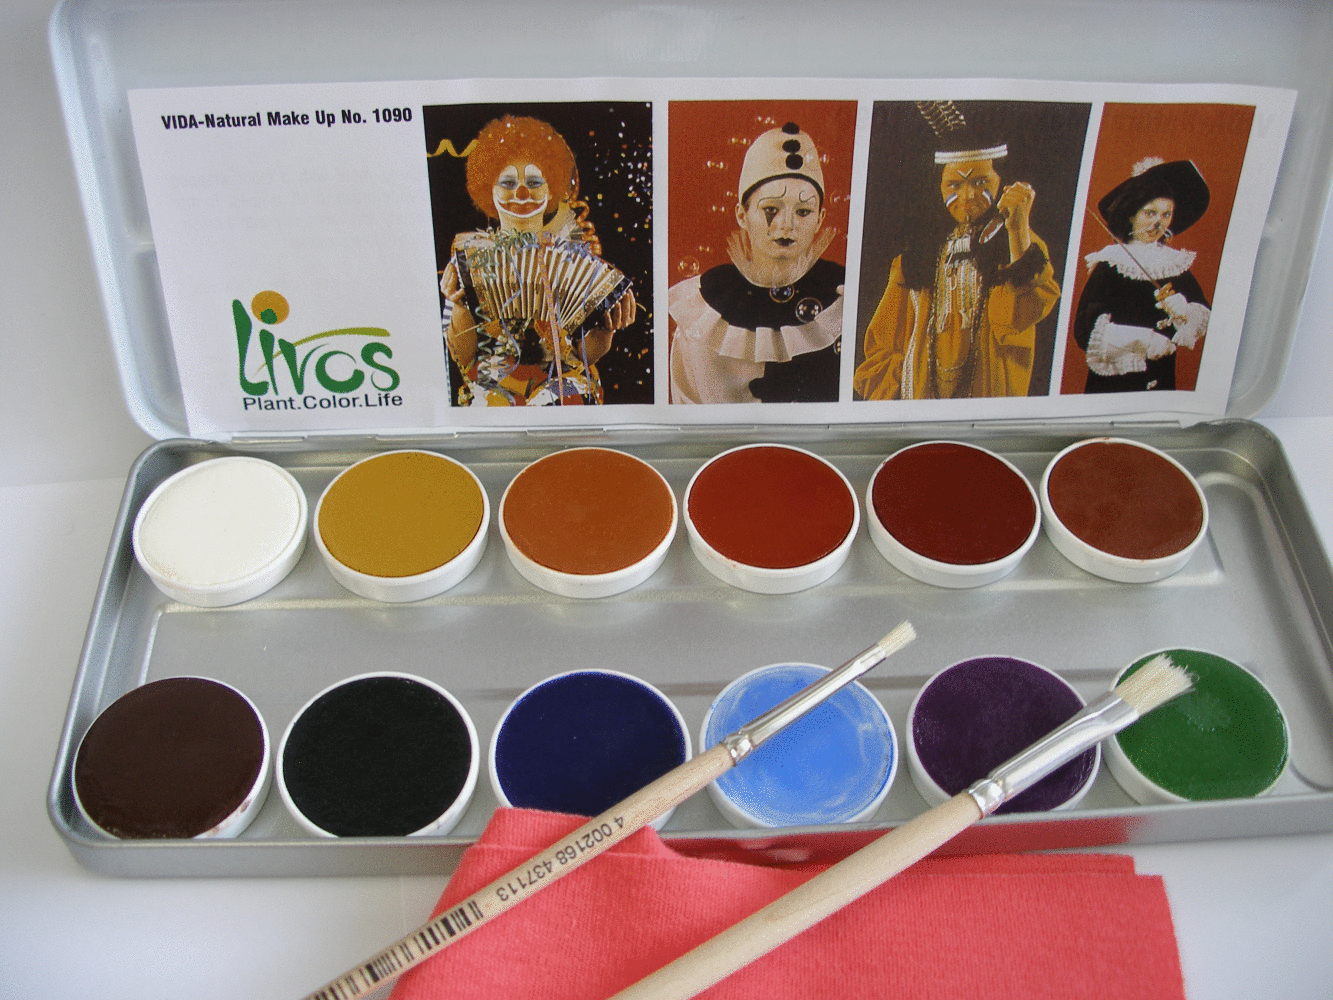 The livos face paints are environmentally friendly non toxic products, safe for babies and kids.